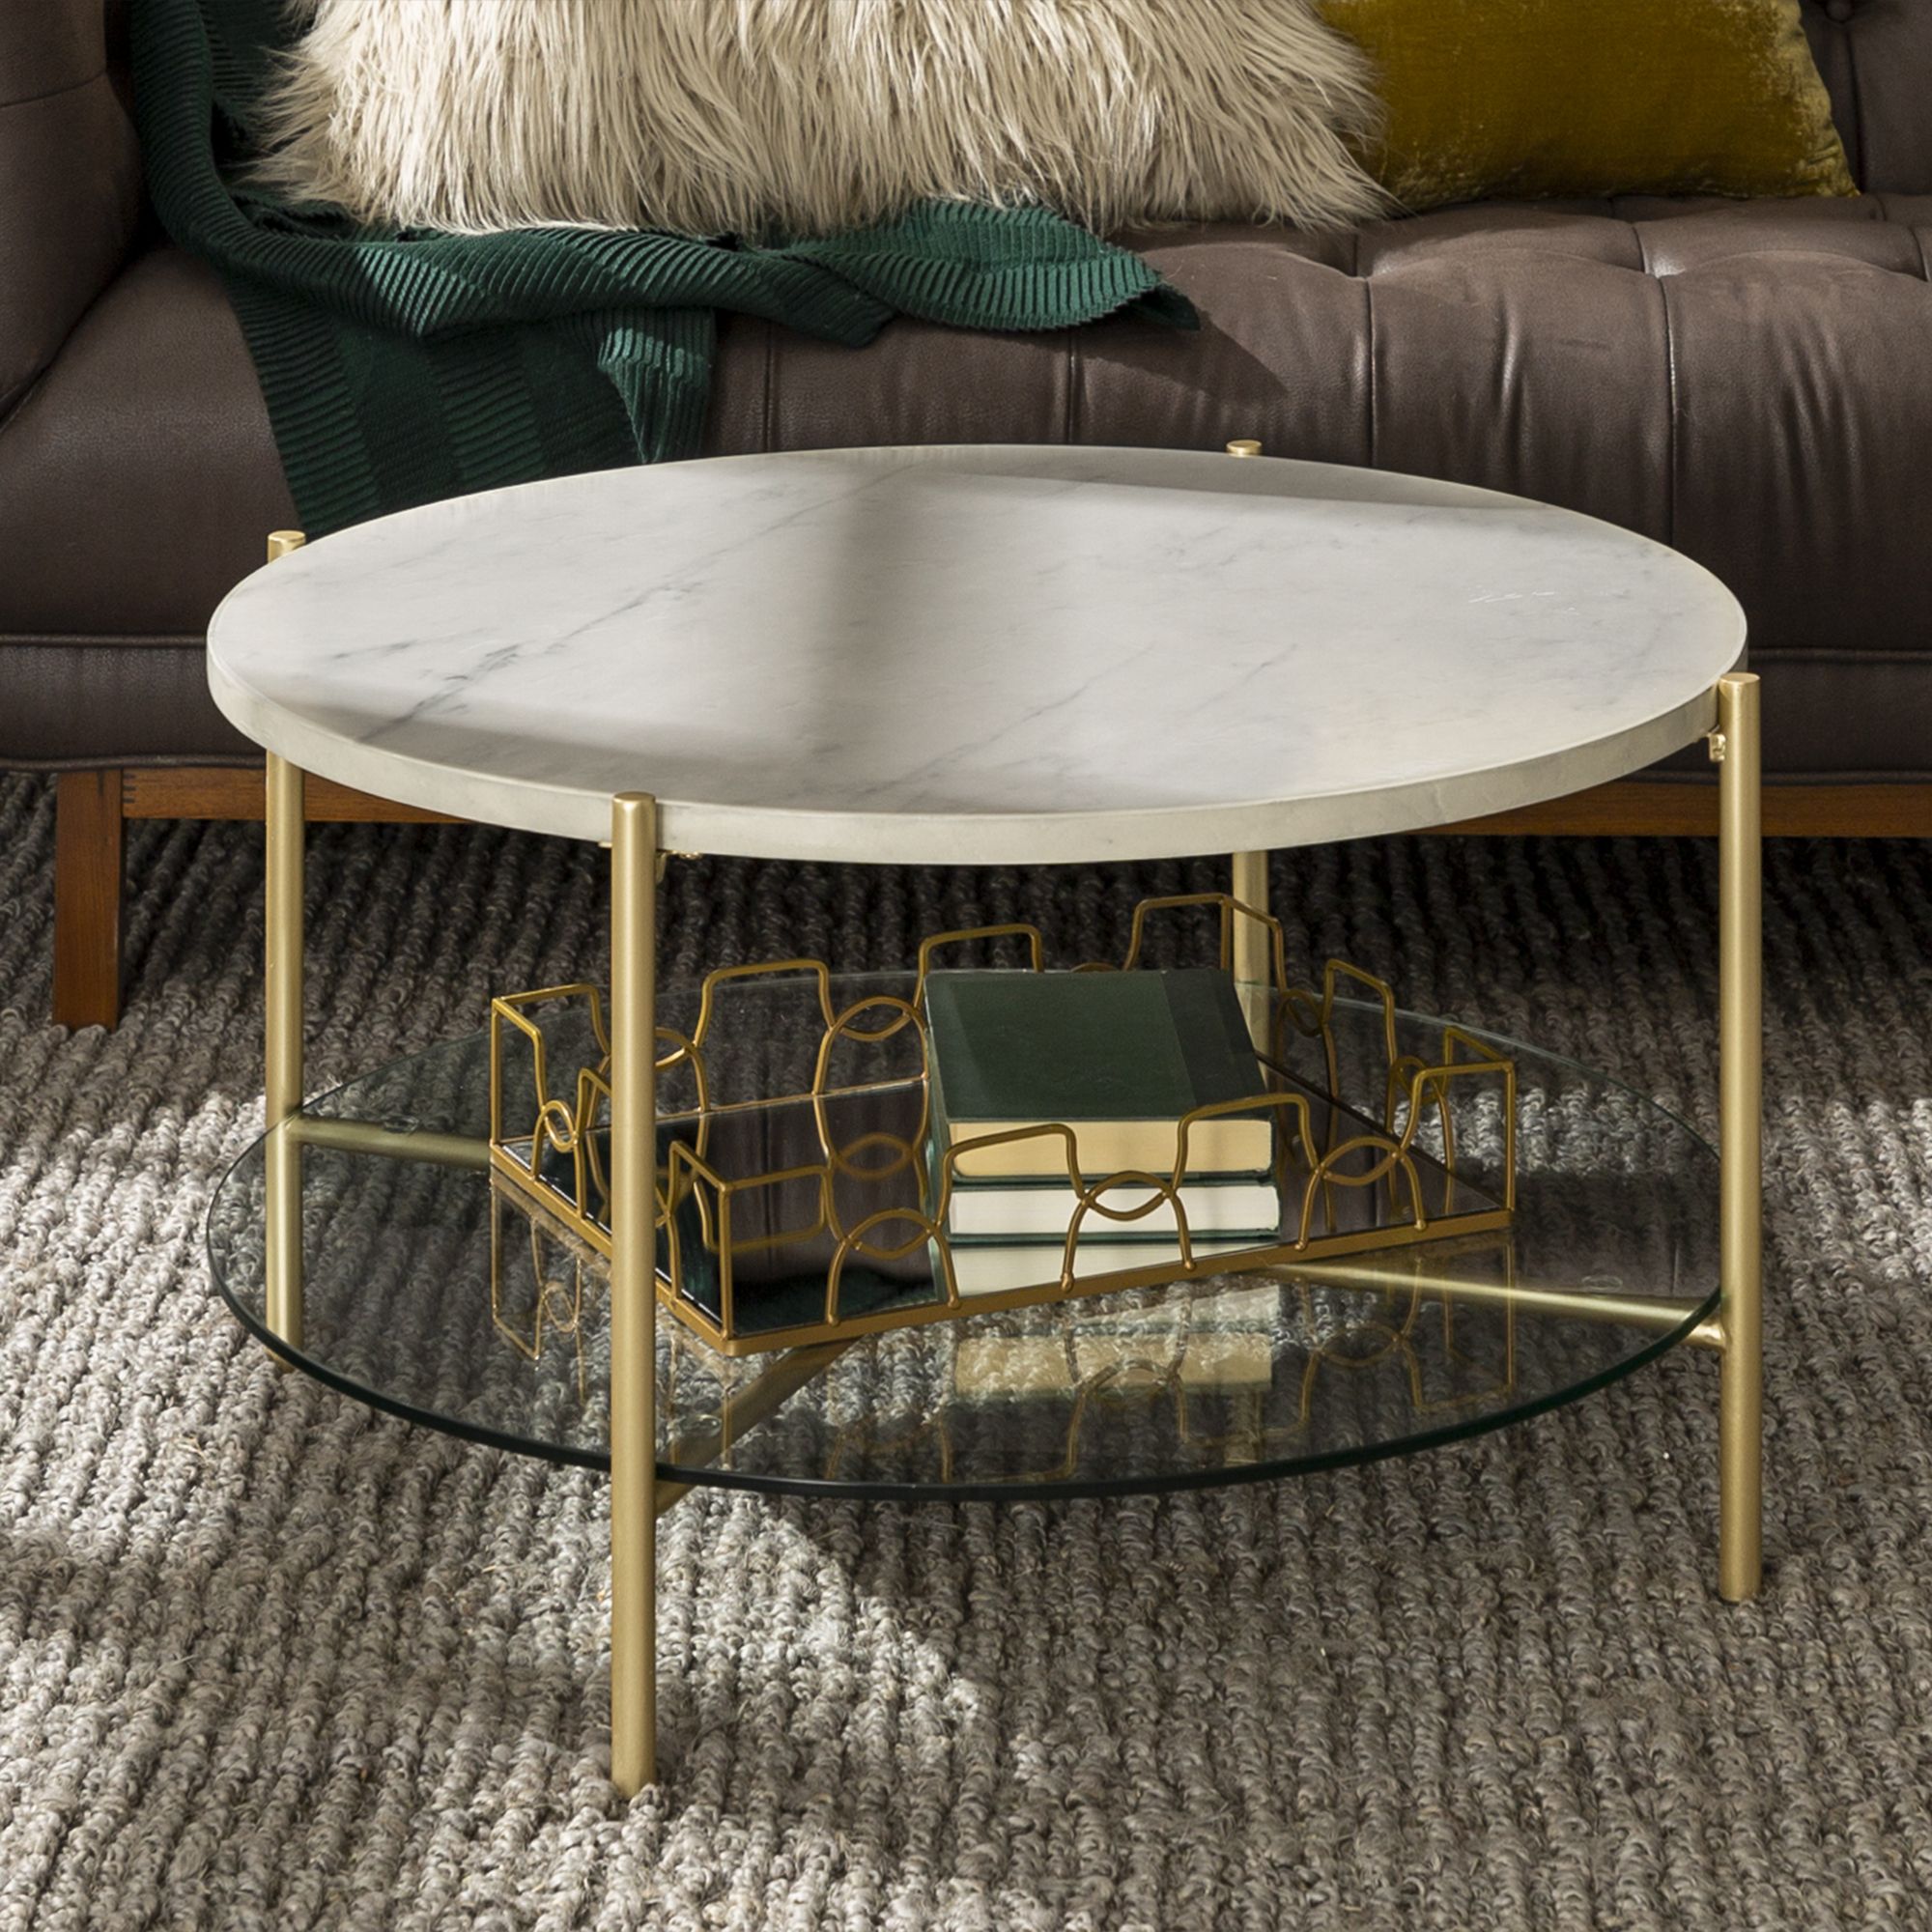 Manor Park Mid Century Round Coffee Table, White Marble With Well Known White Stone Coffee Tables (View 8 of 20)